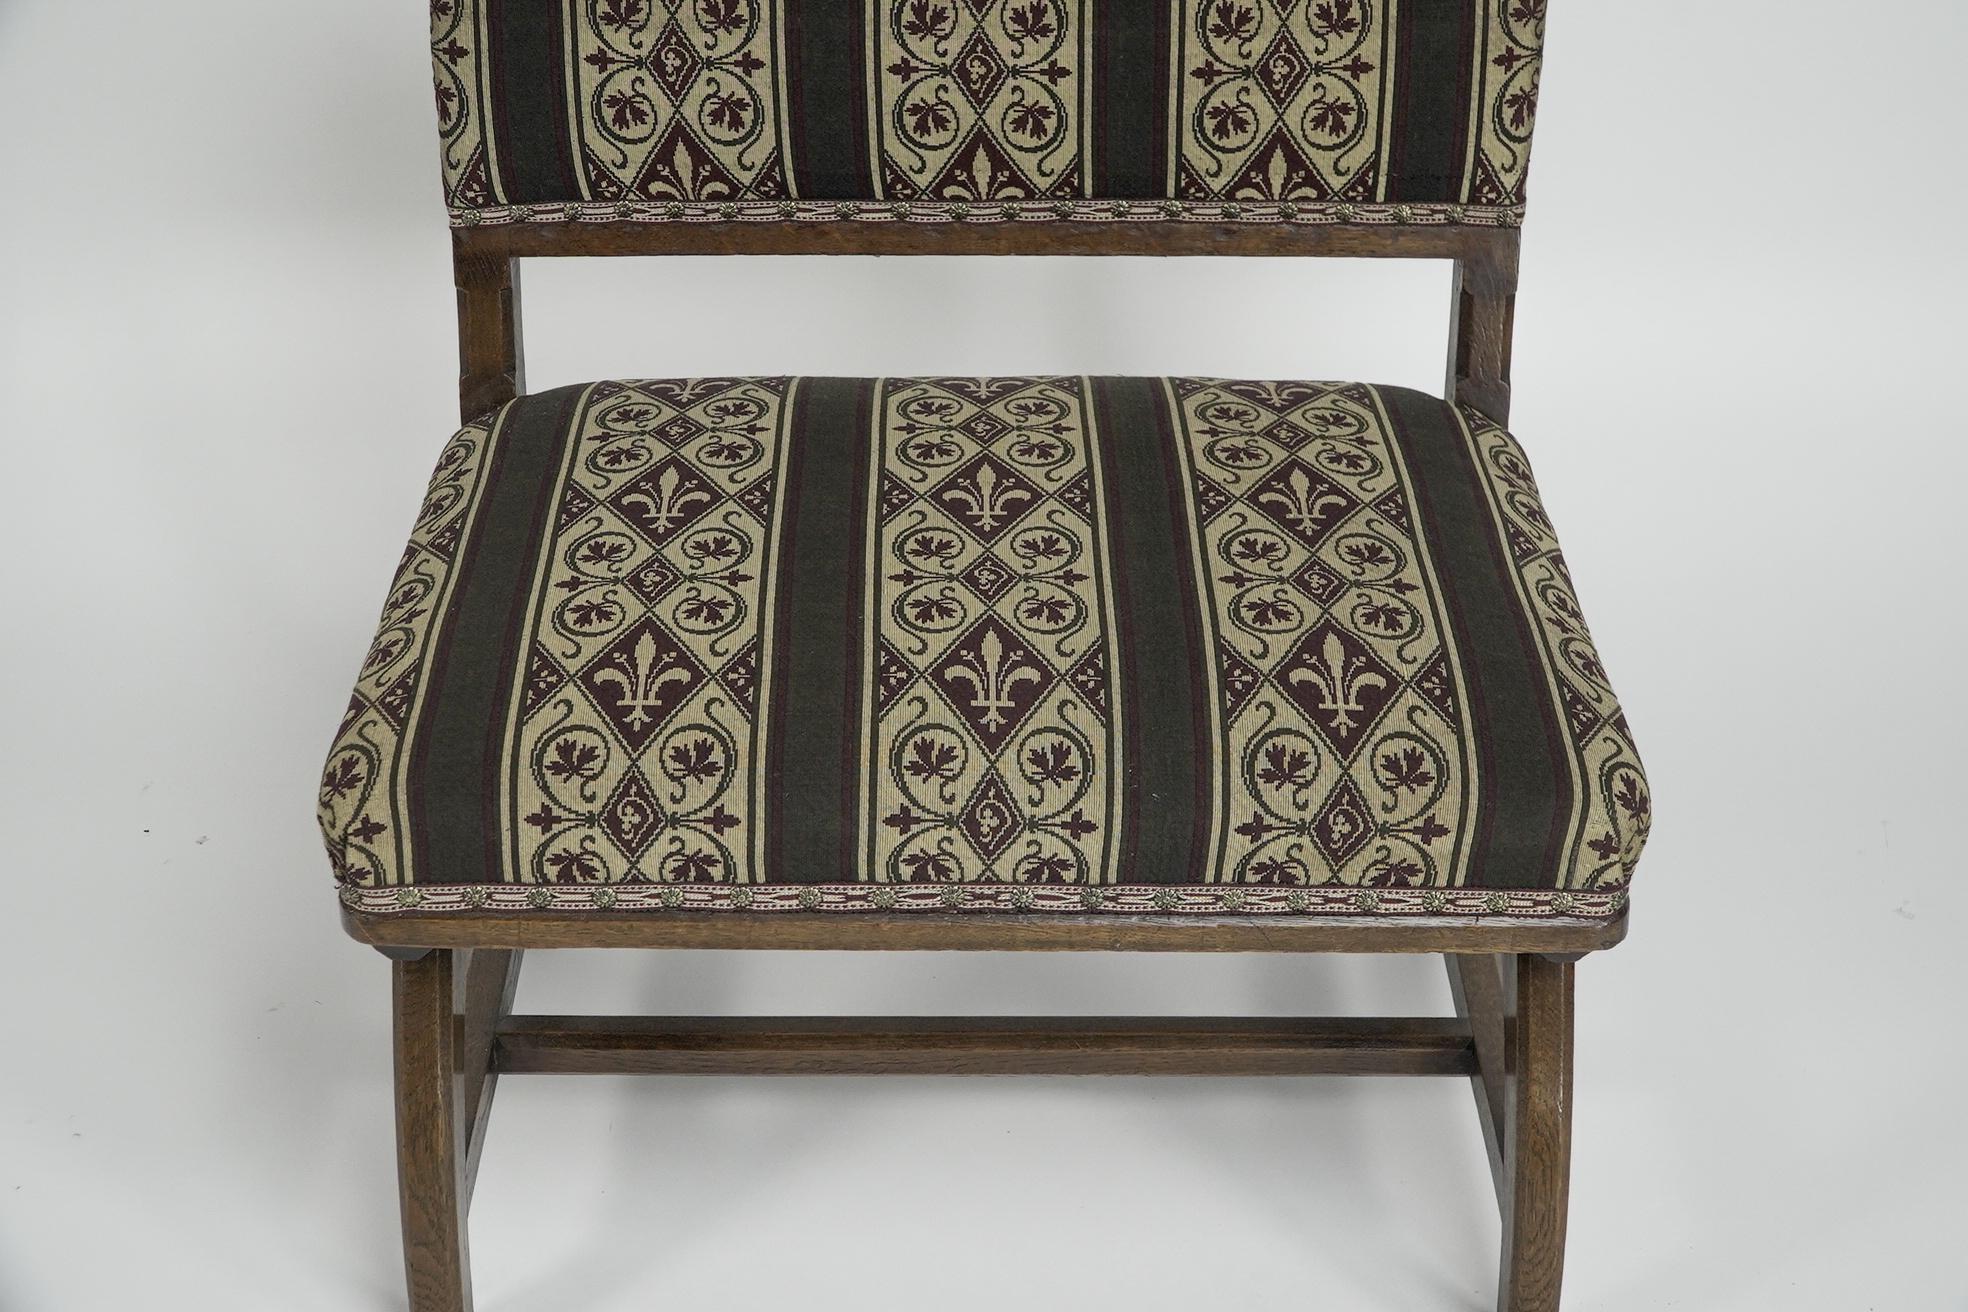 E W Pugin attri. A Gothic Revival oak duet chair with a wider than usual seat. For Sale 3